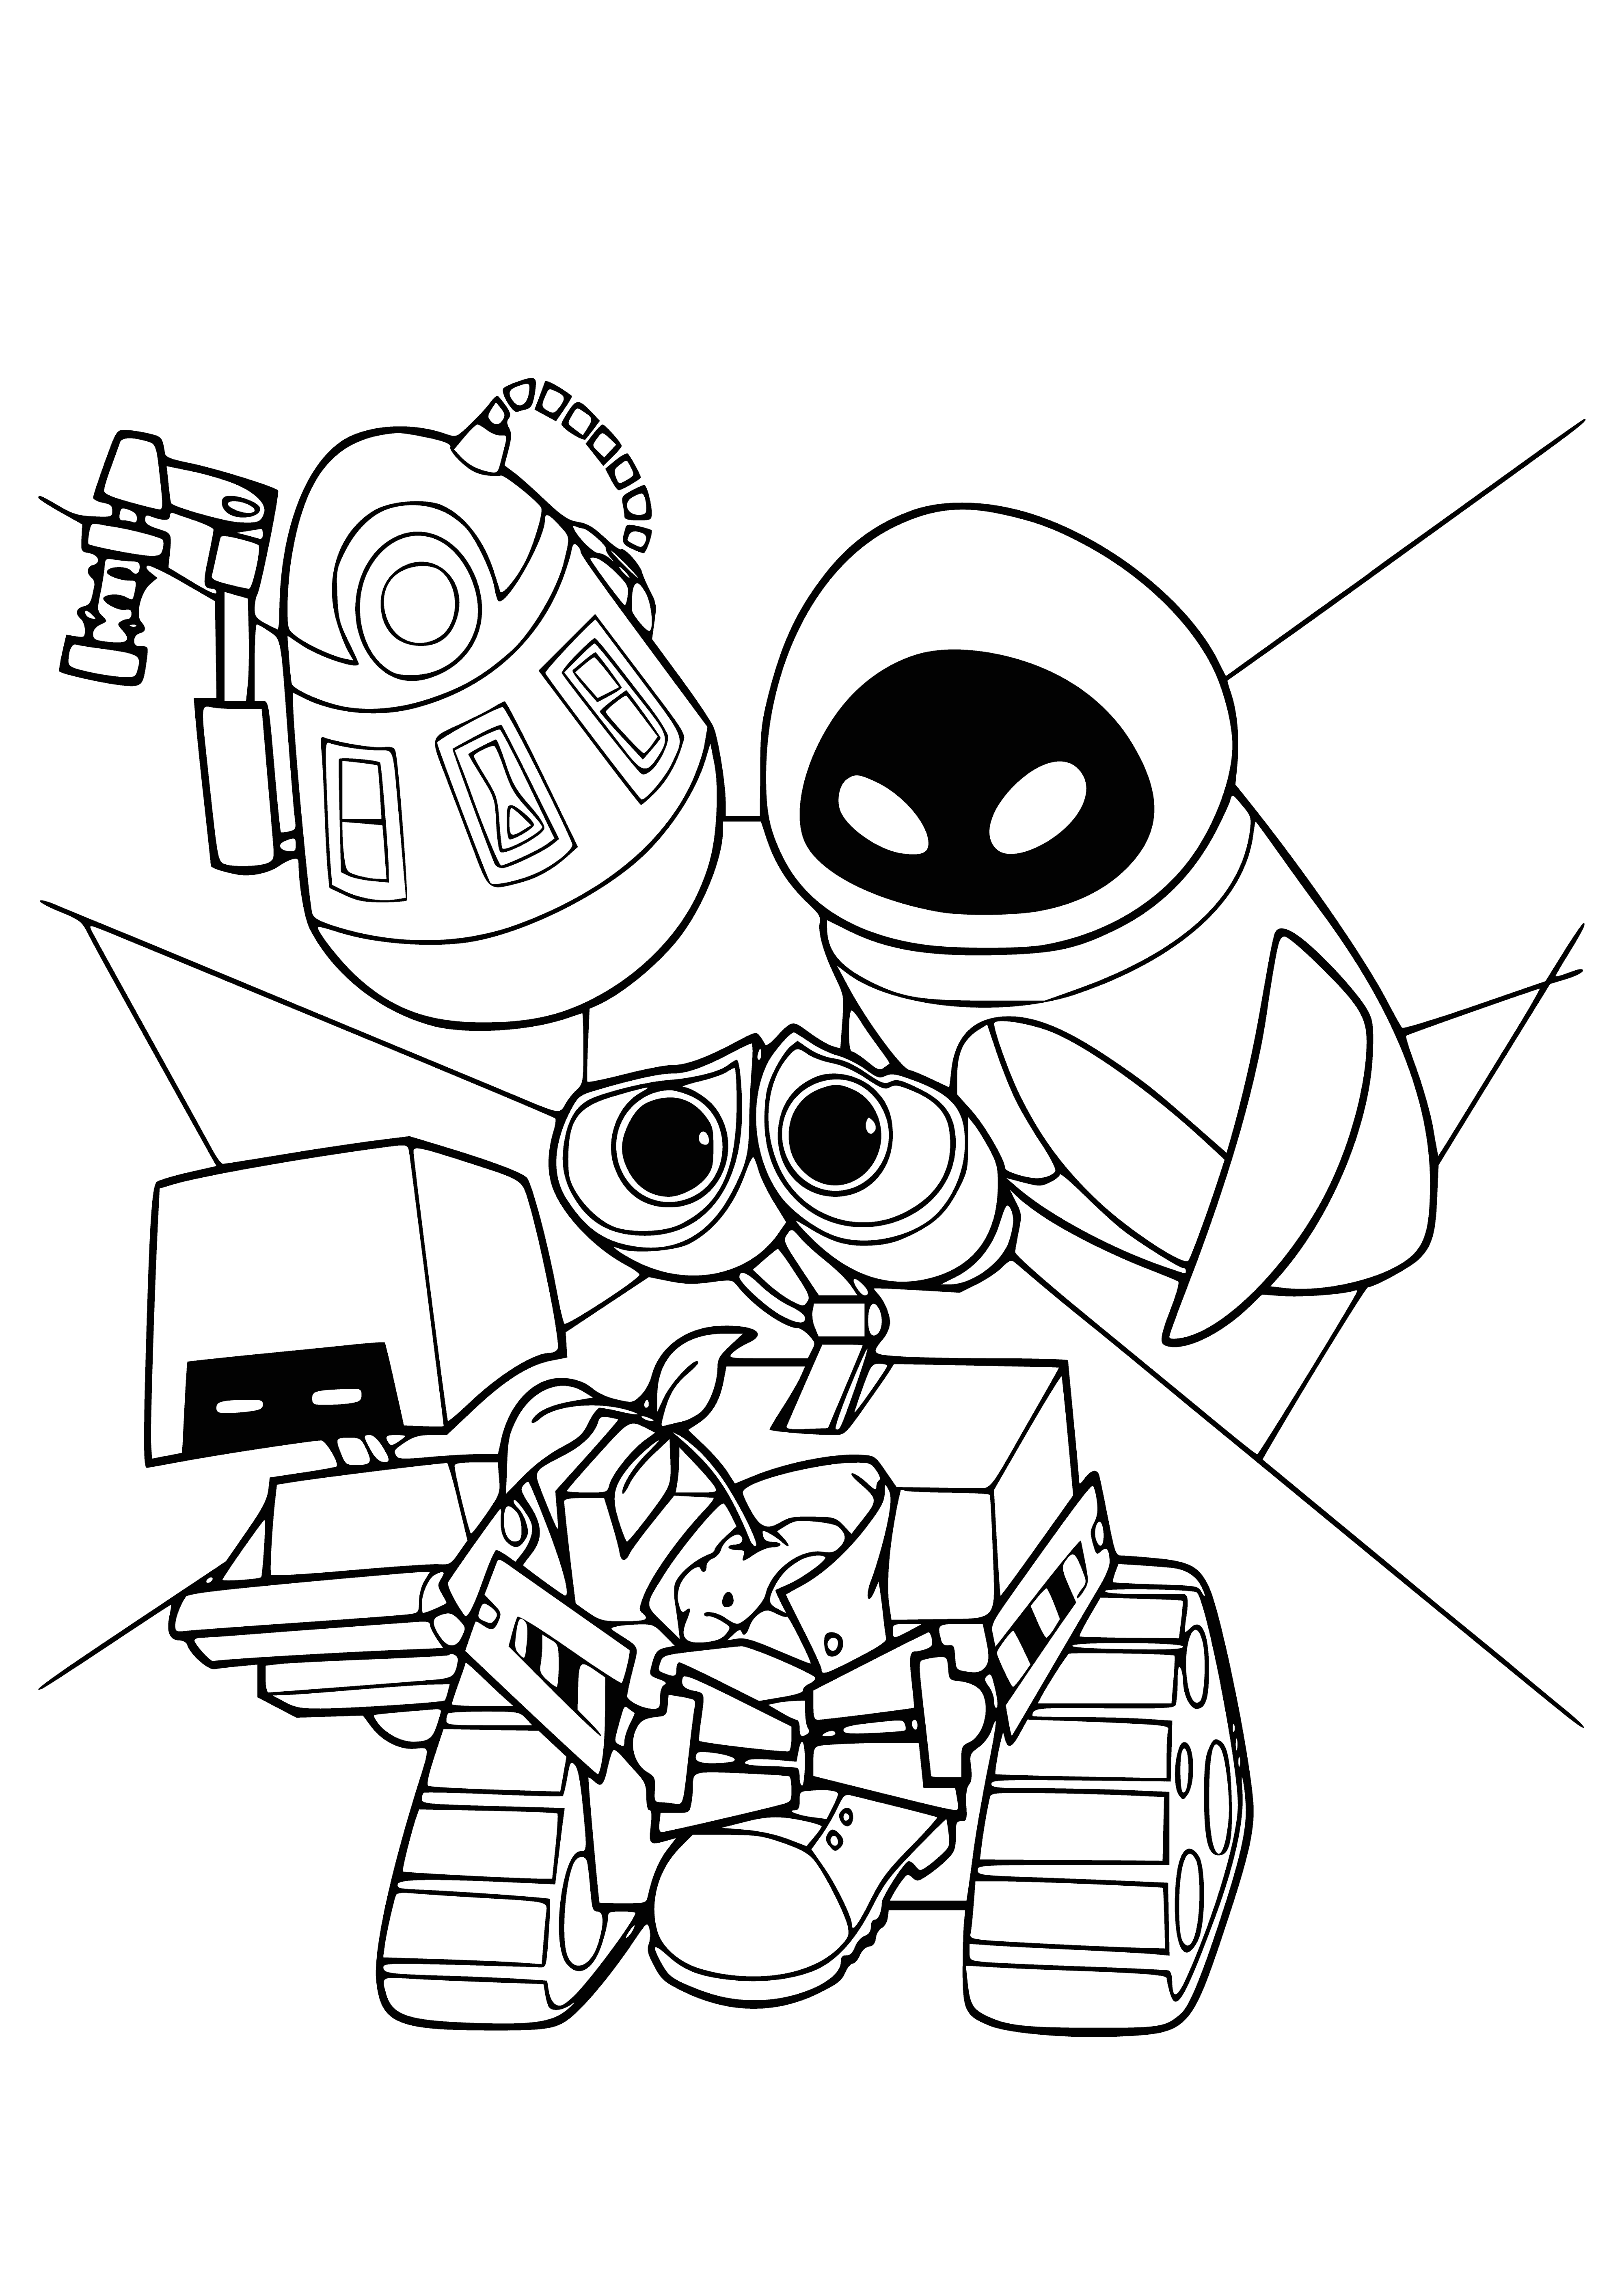 coloring page: Robots help in manufacturing, medicine, military and other fields by doing difficult or impossible tasks for humans.